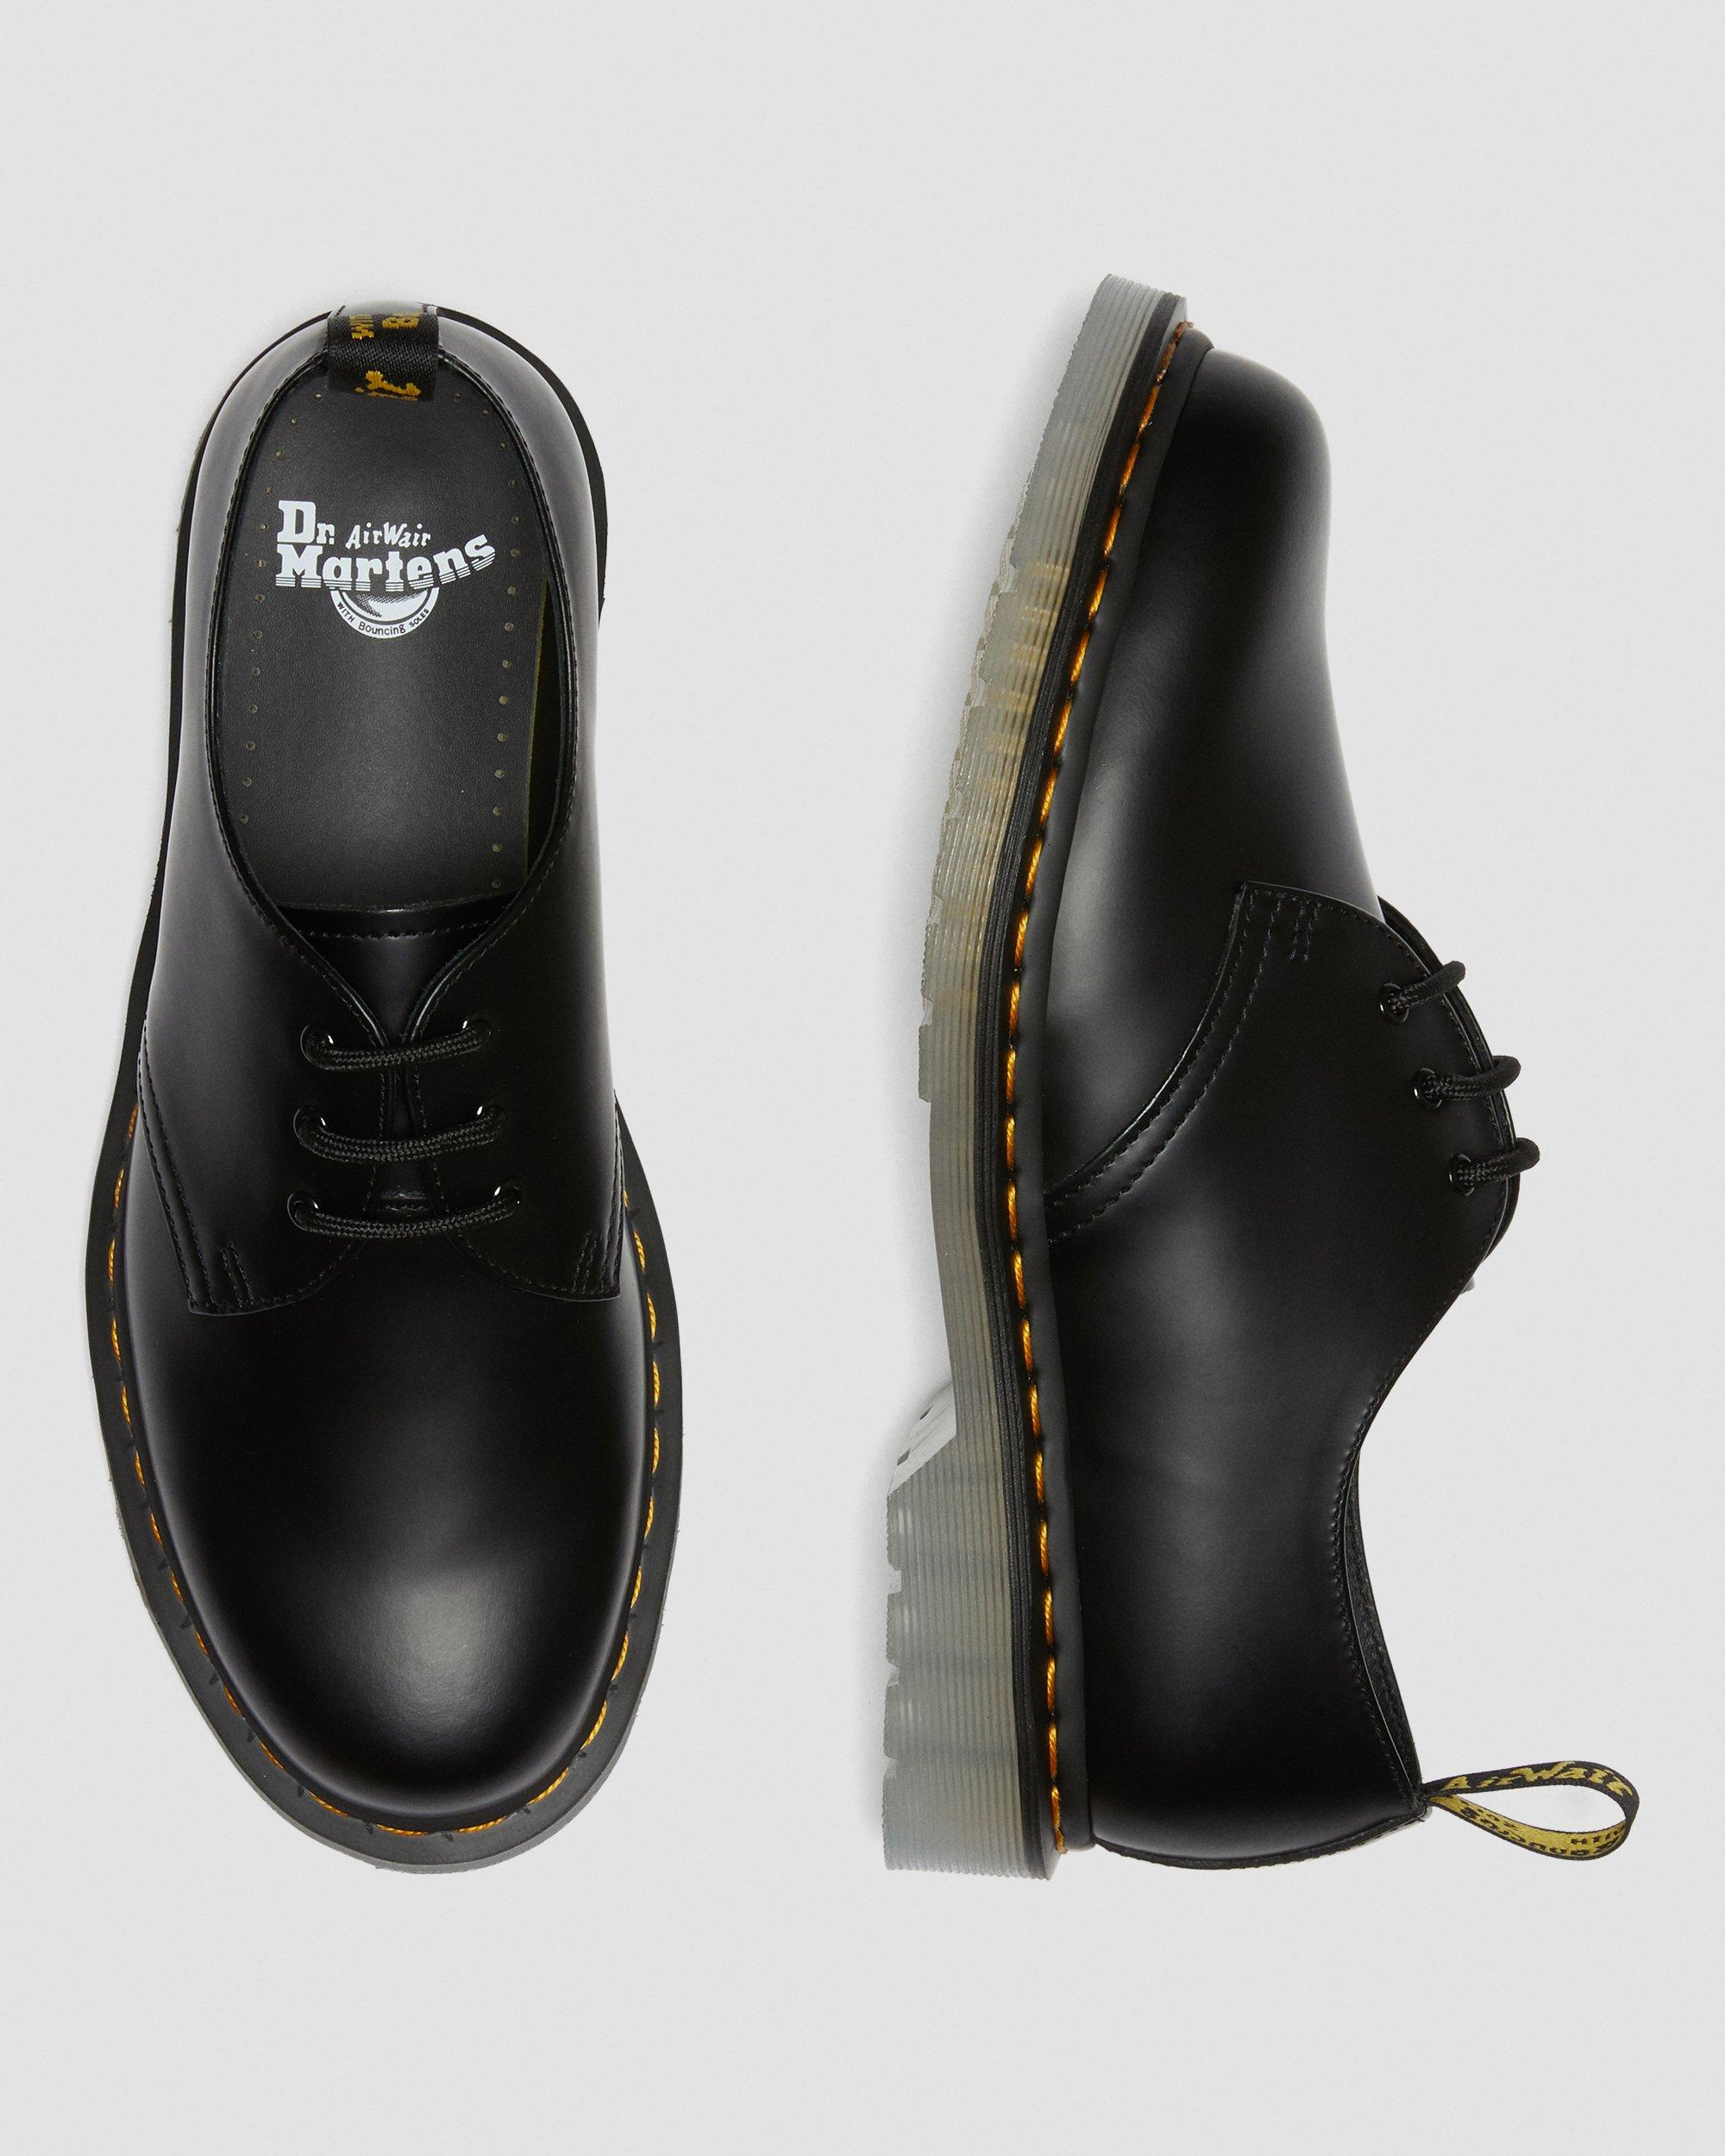 Dr Marten 1461z Genuine Classic shoes Black soft leather yellow stitch rrp £115 